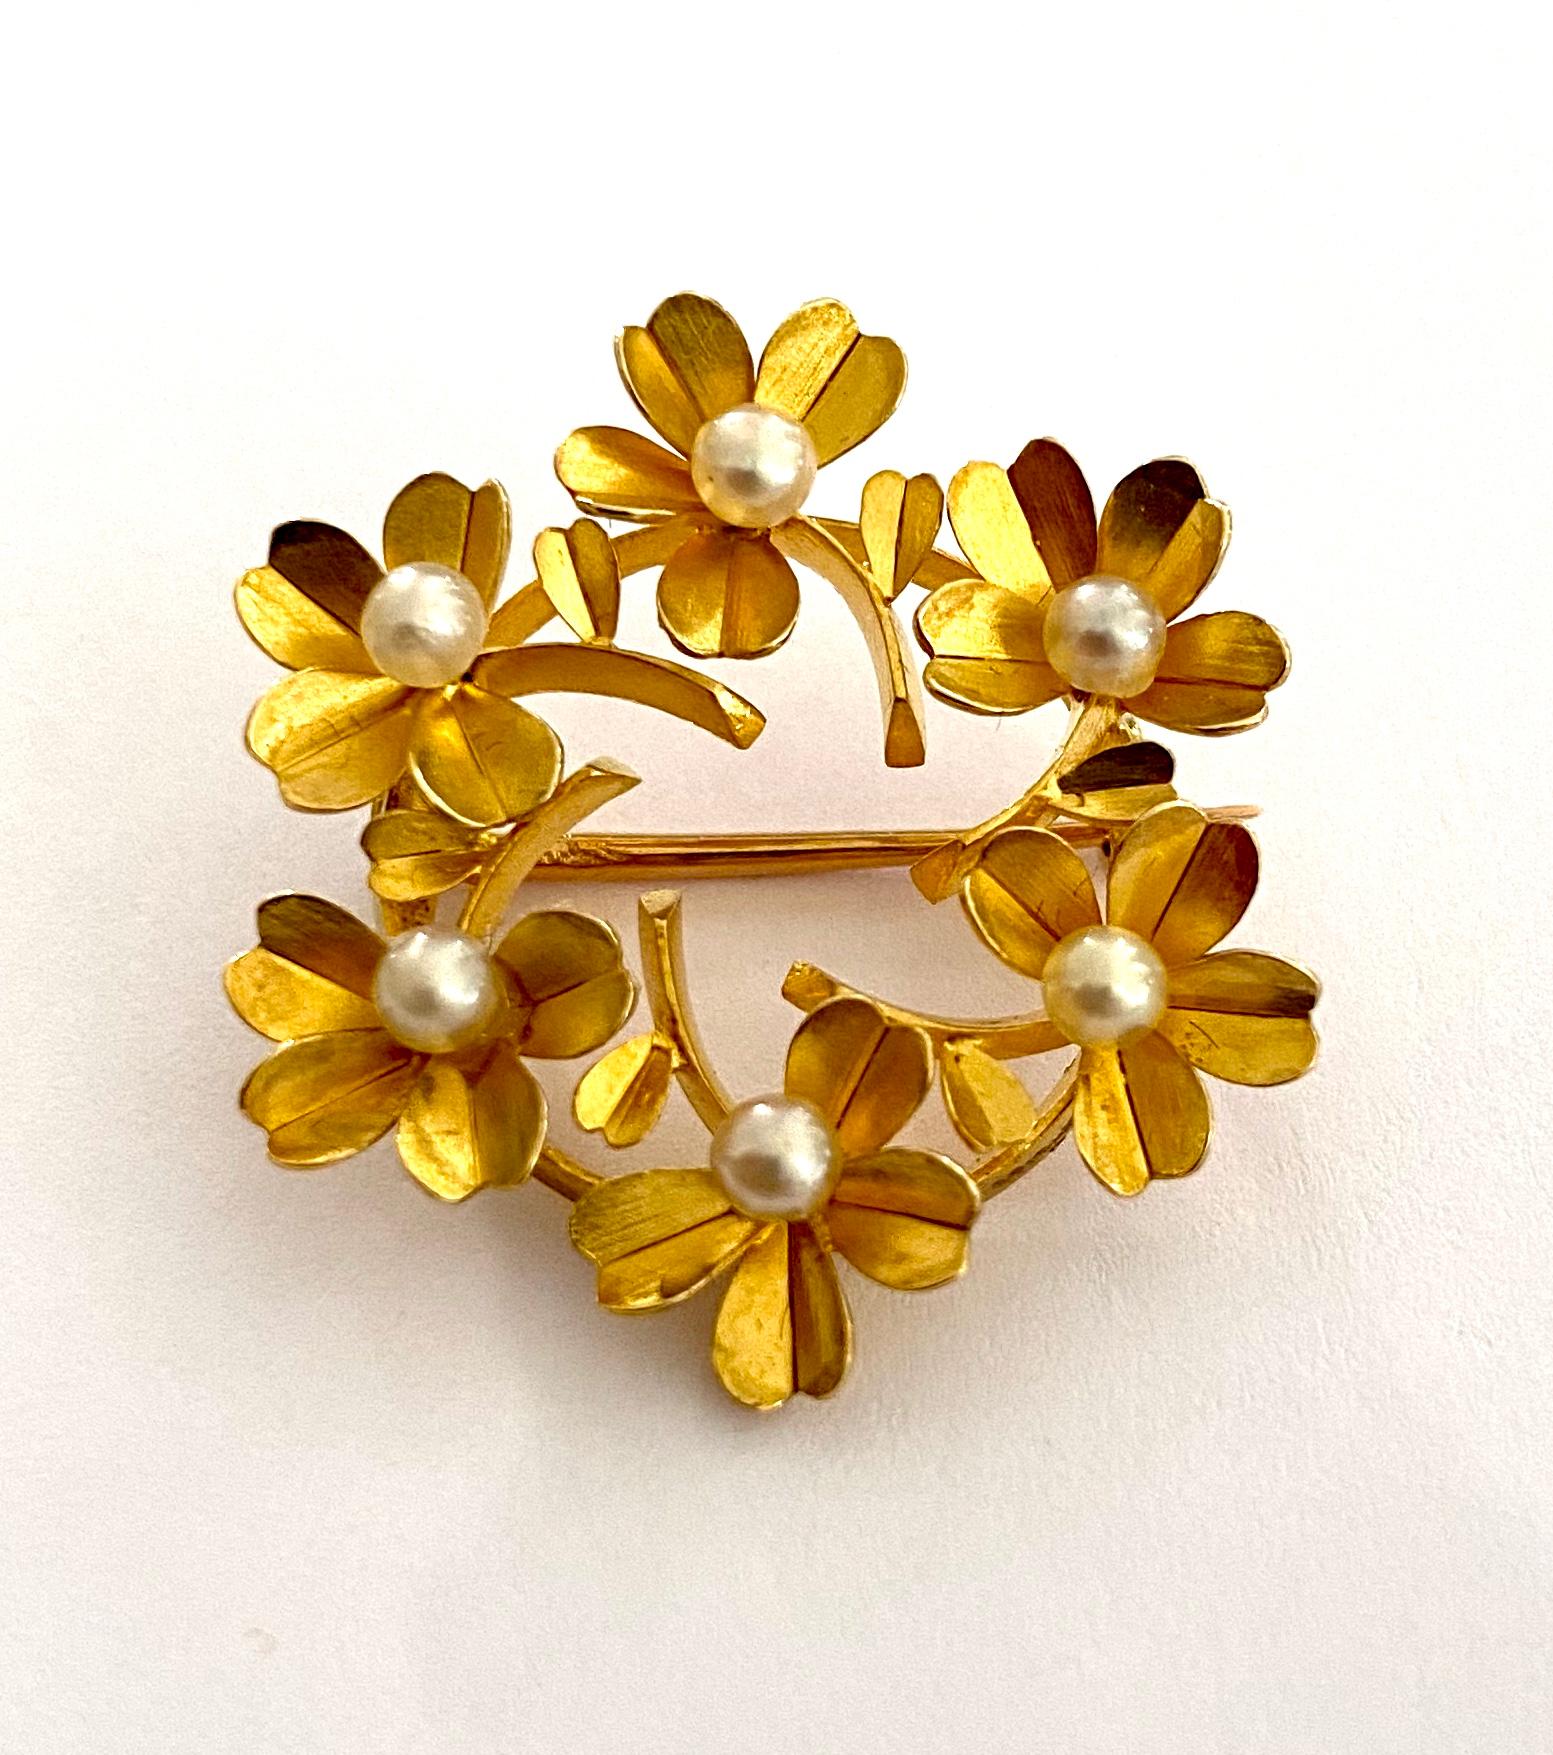 - 18K. yellow gold brooch, consisting of: 6 flowers, each with a cult. pearl
- French hallmarks, ca 1950
- Size: 2.8 cm around.
- Weight: 4.23 grams